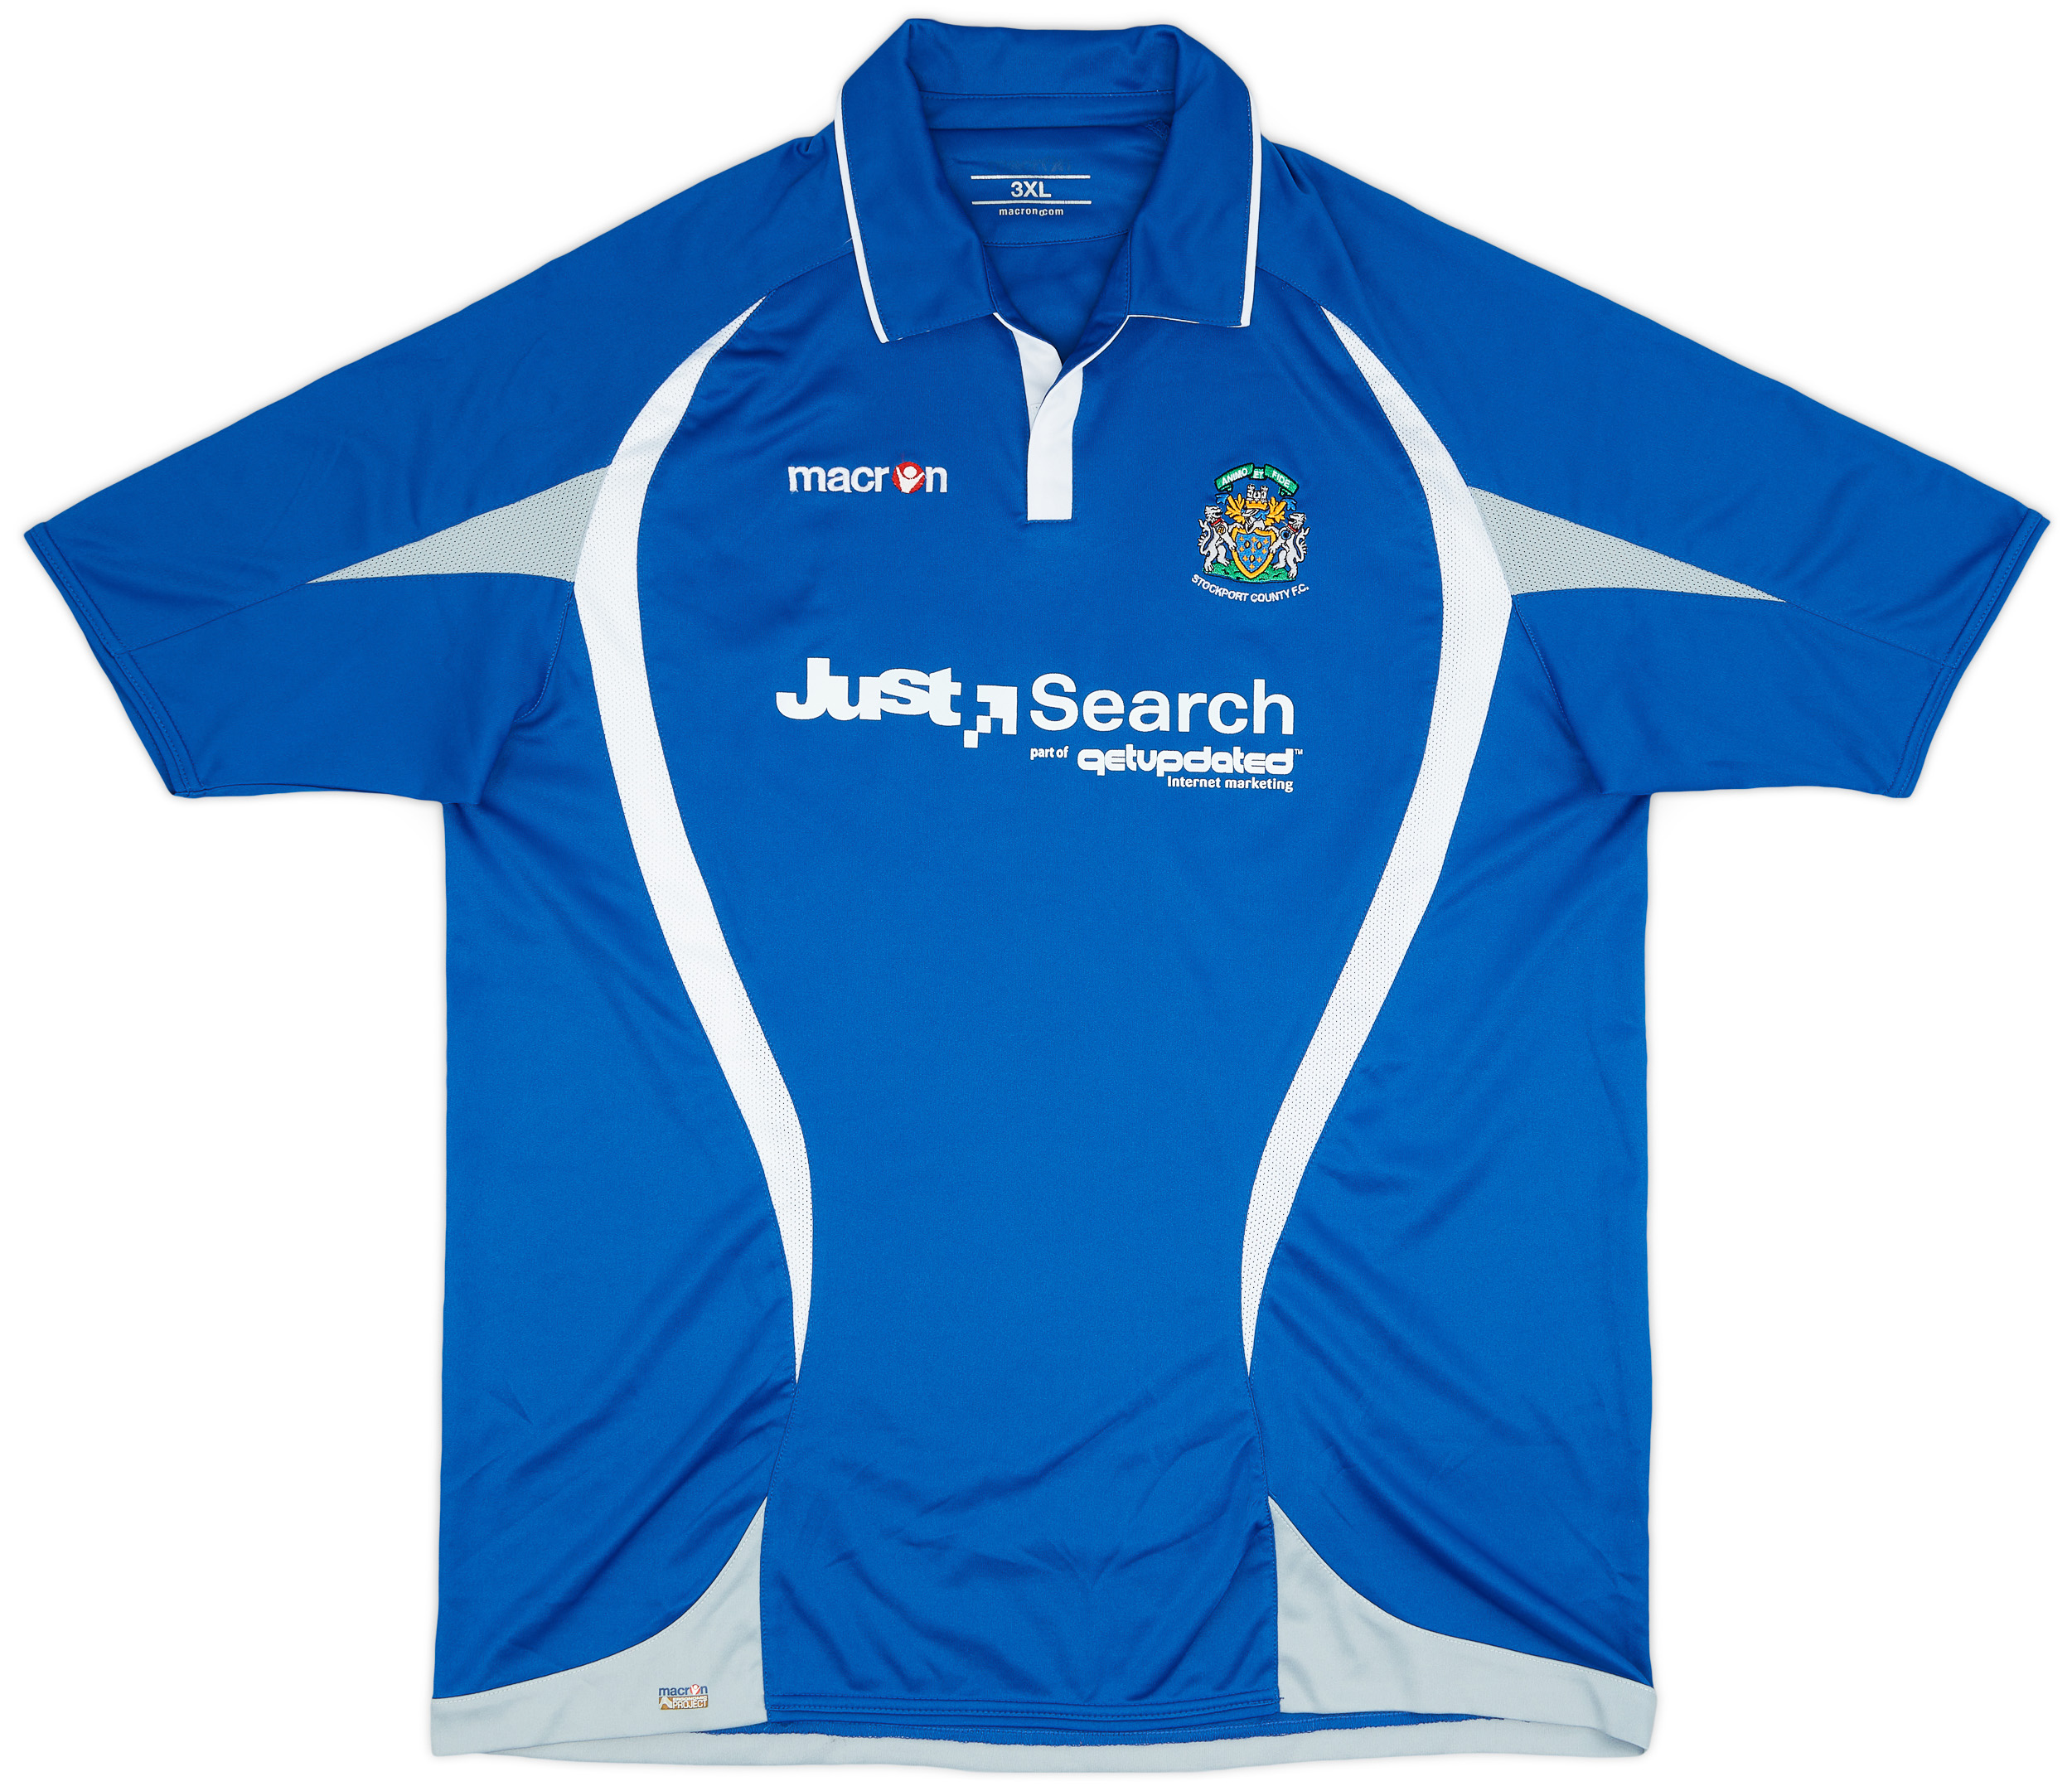 2009-10 Stockport County Home Shirt - 9/10 - ()